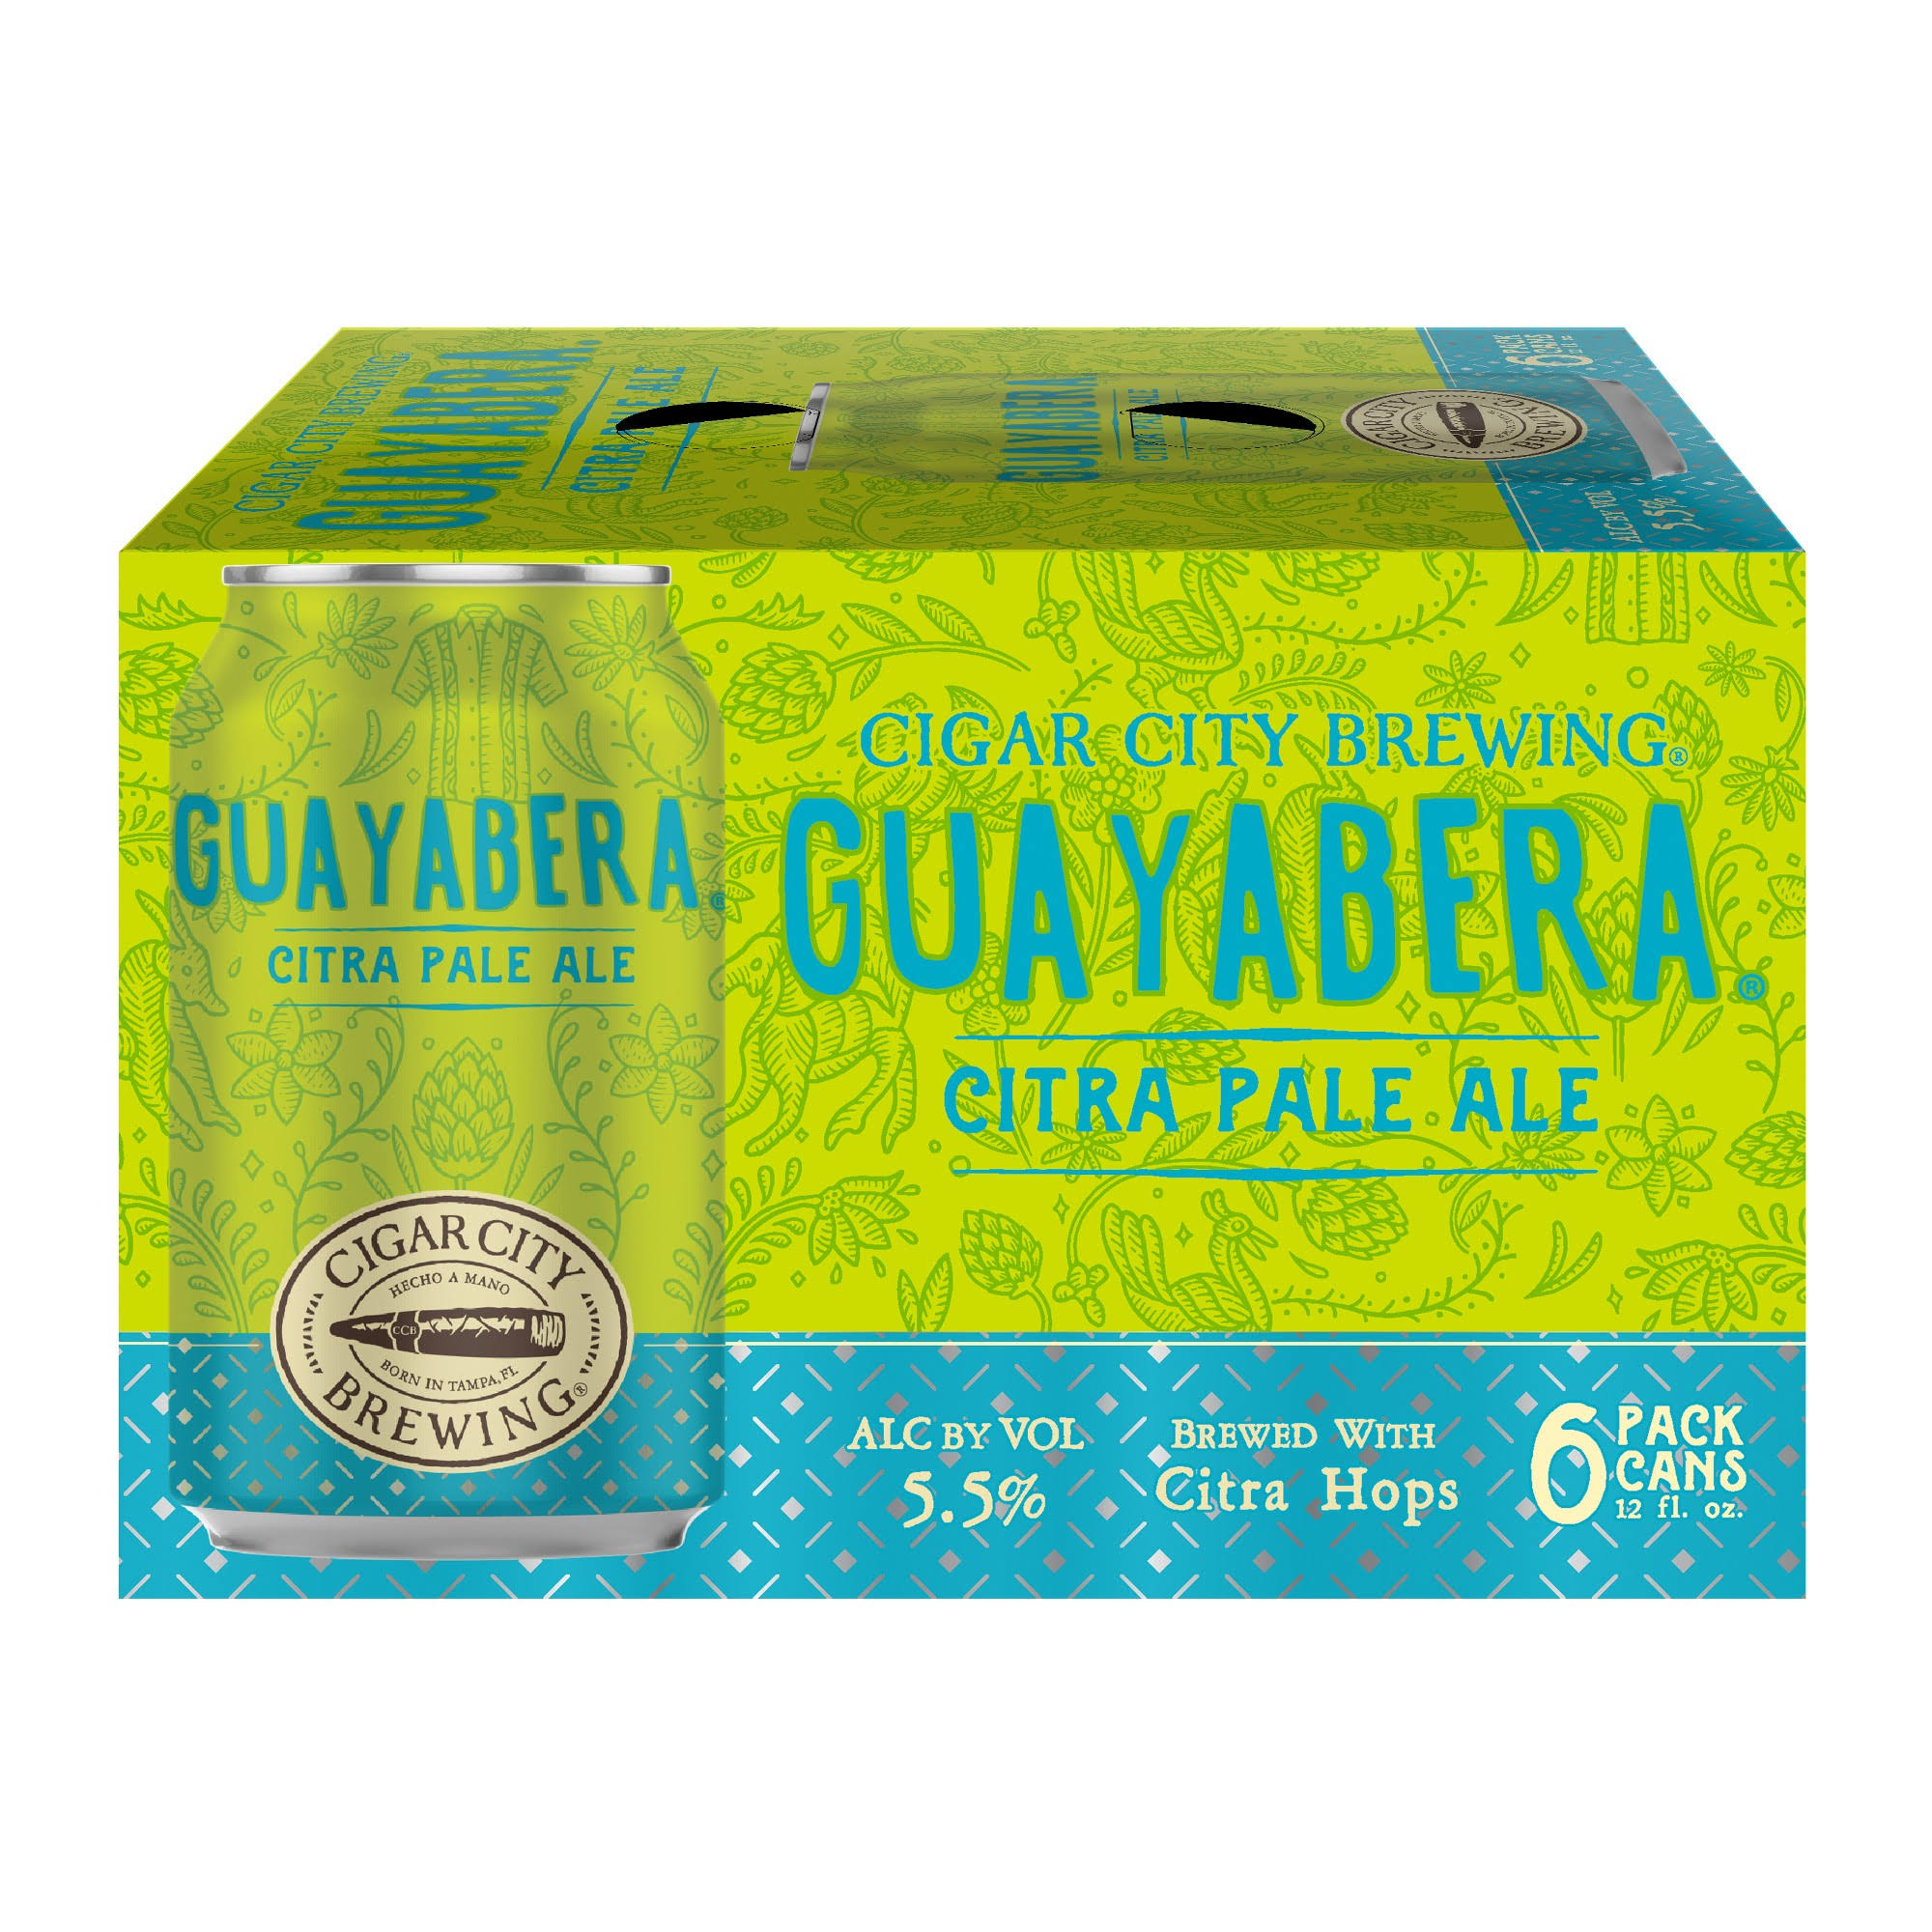 Cigar City Brewing Guayabera Beer, Citra Pale Ale, 6 Pack - 6 pack, 12 fl oz cans